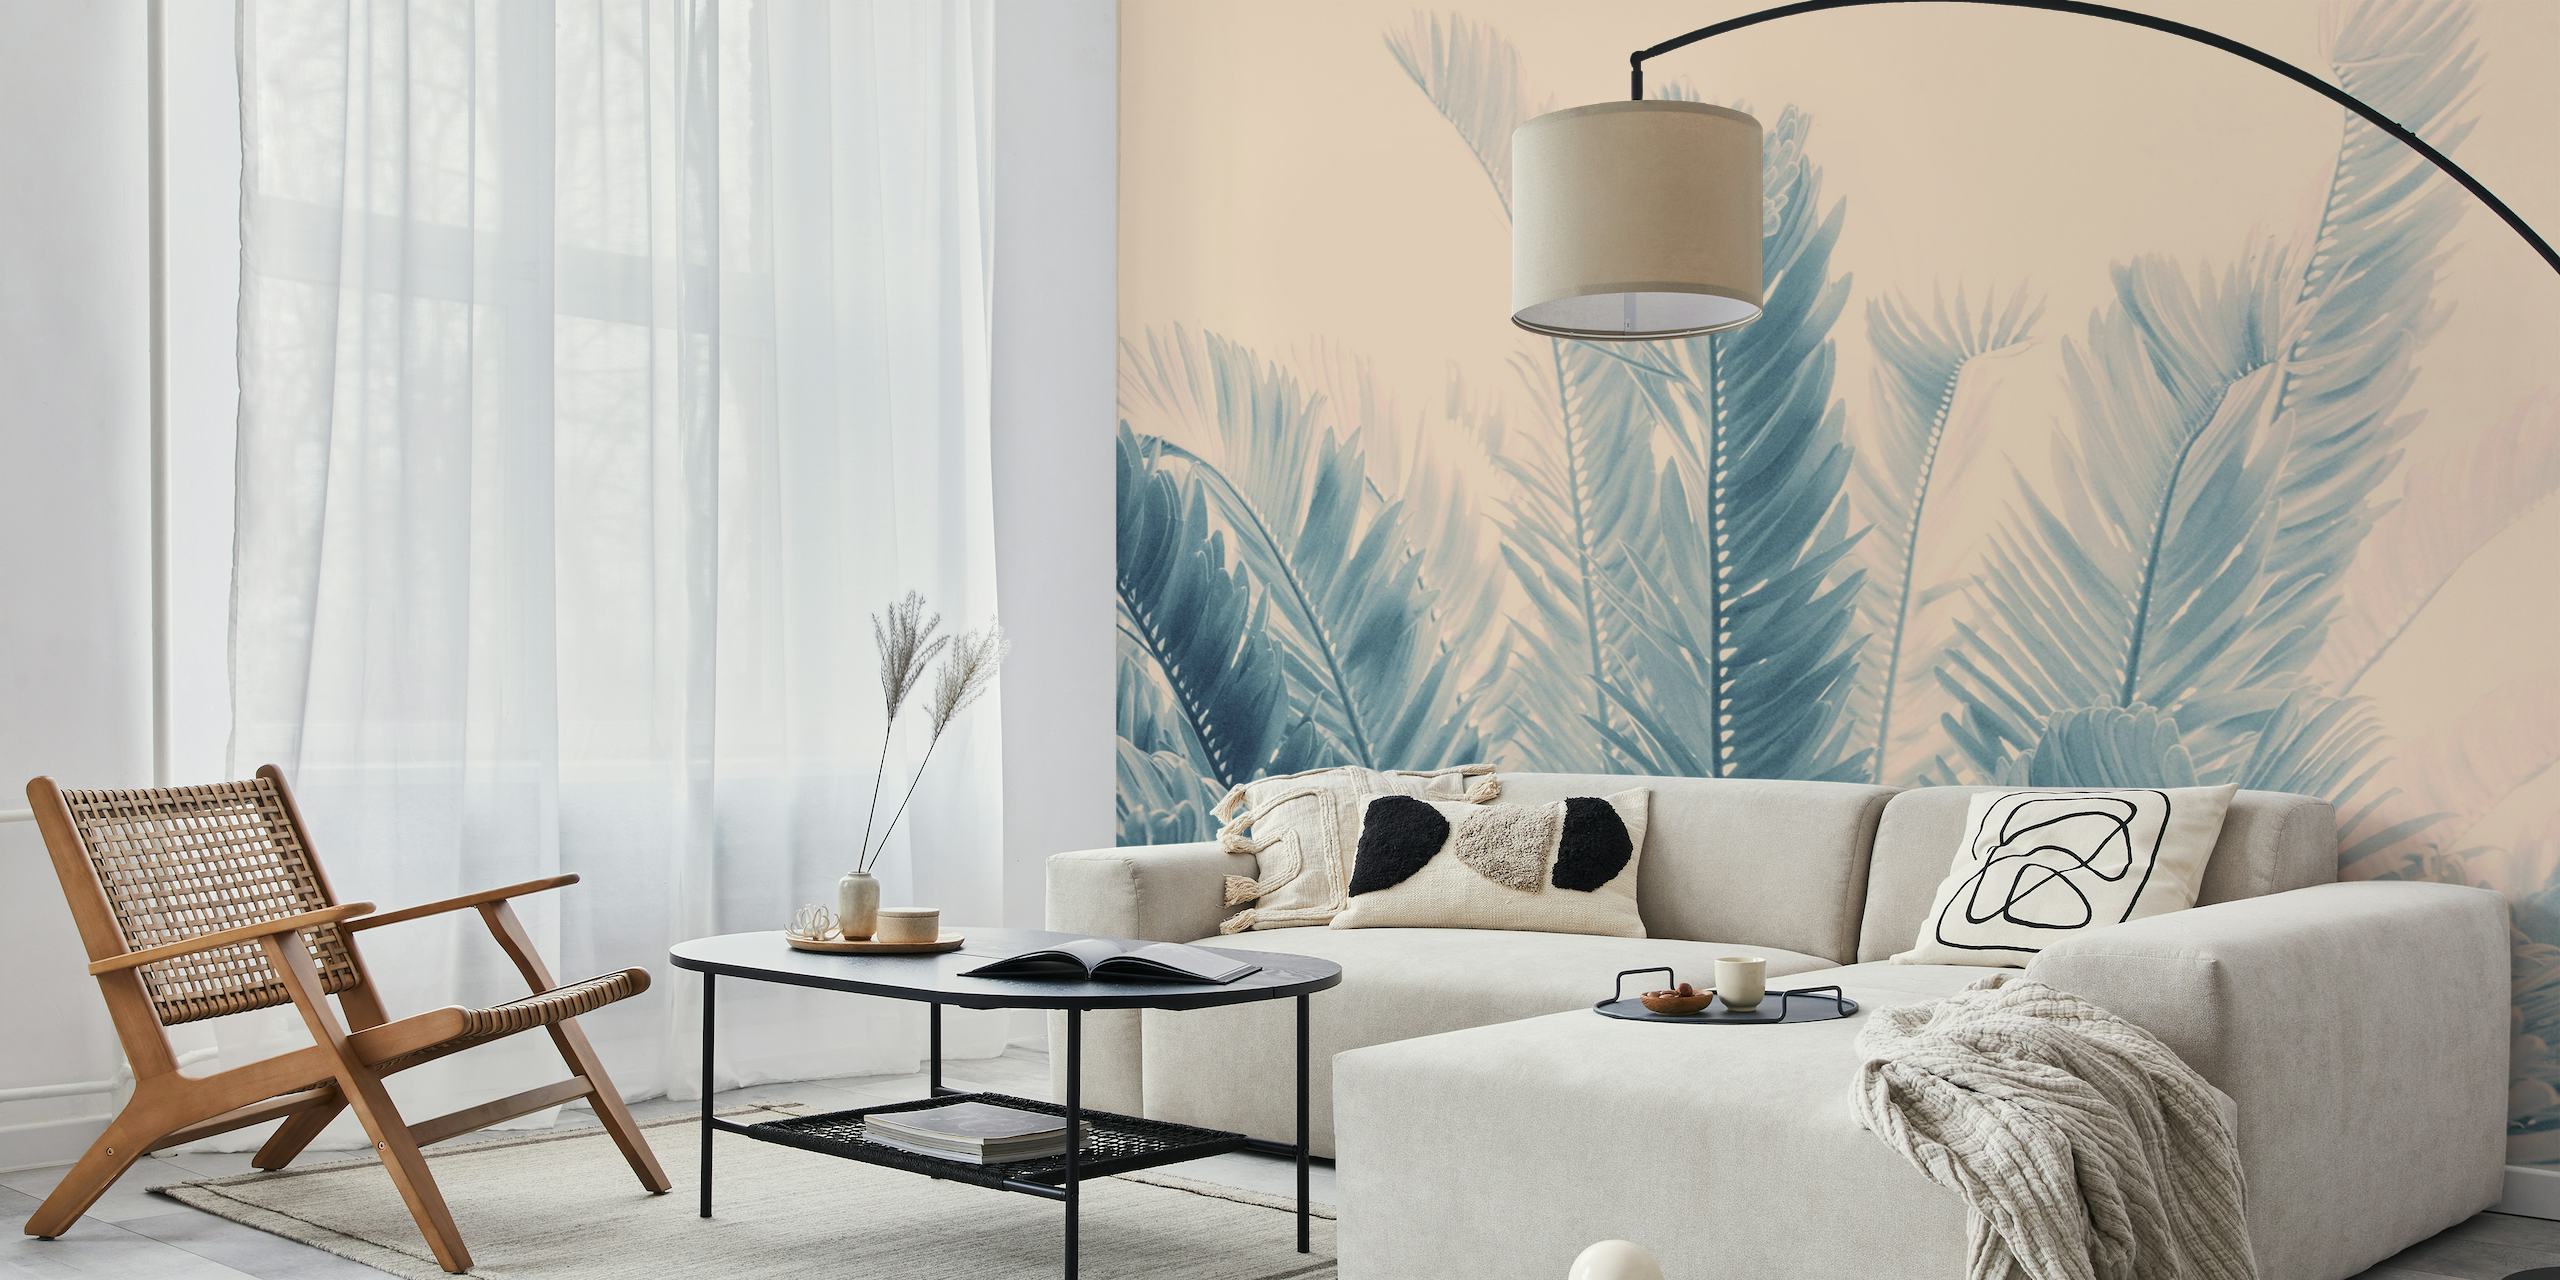 Tropical Leaves Dream 4 wall mural with blue leaves for a soothing interior